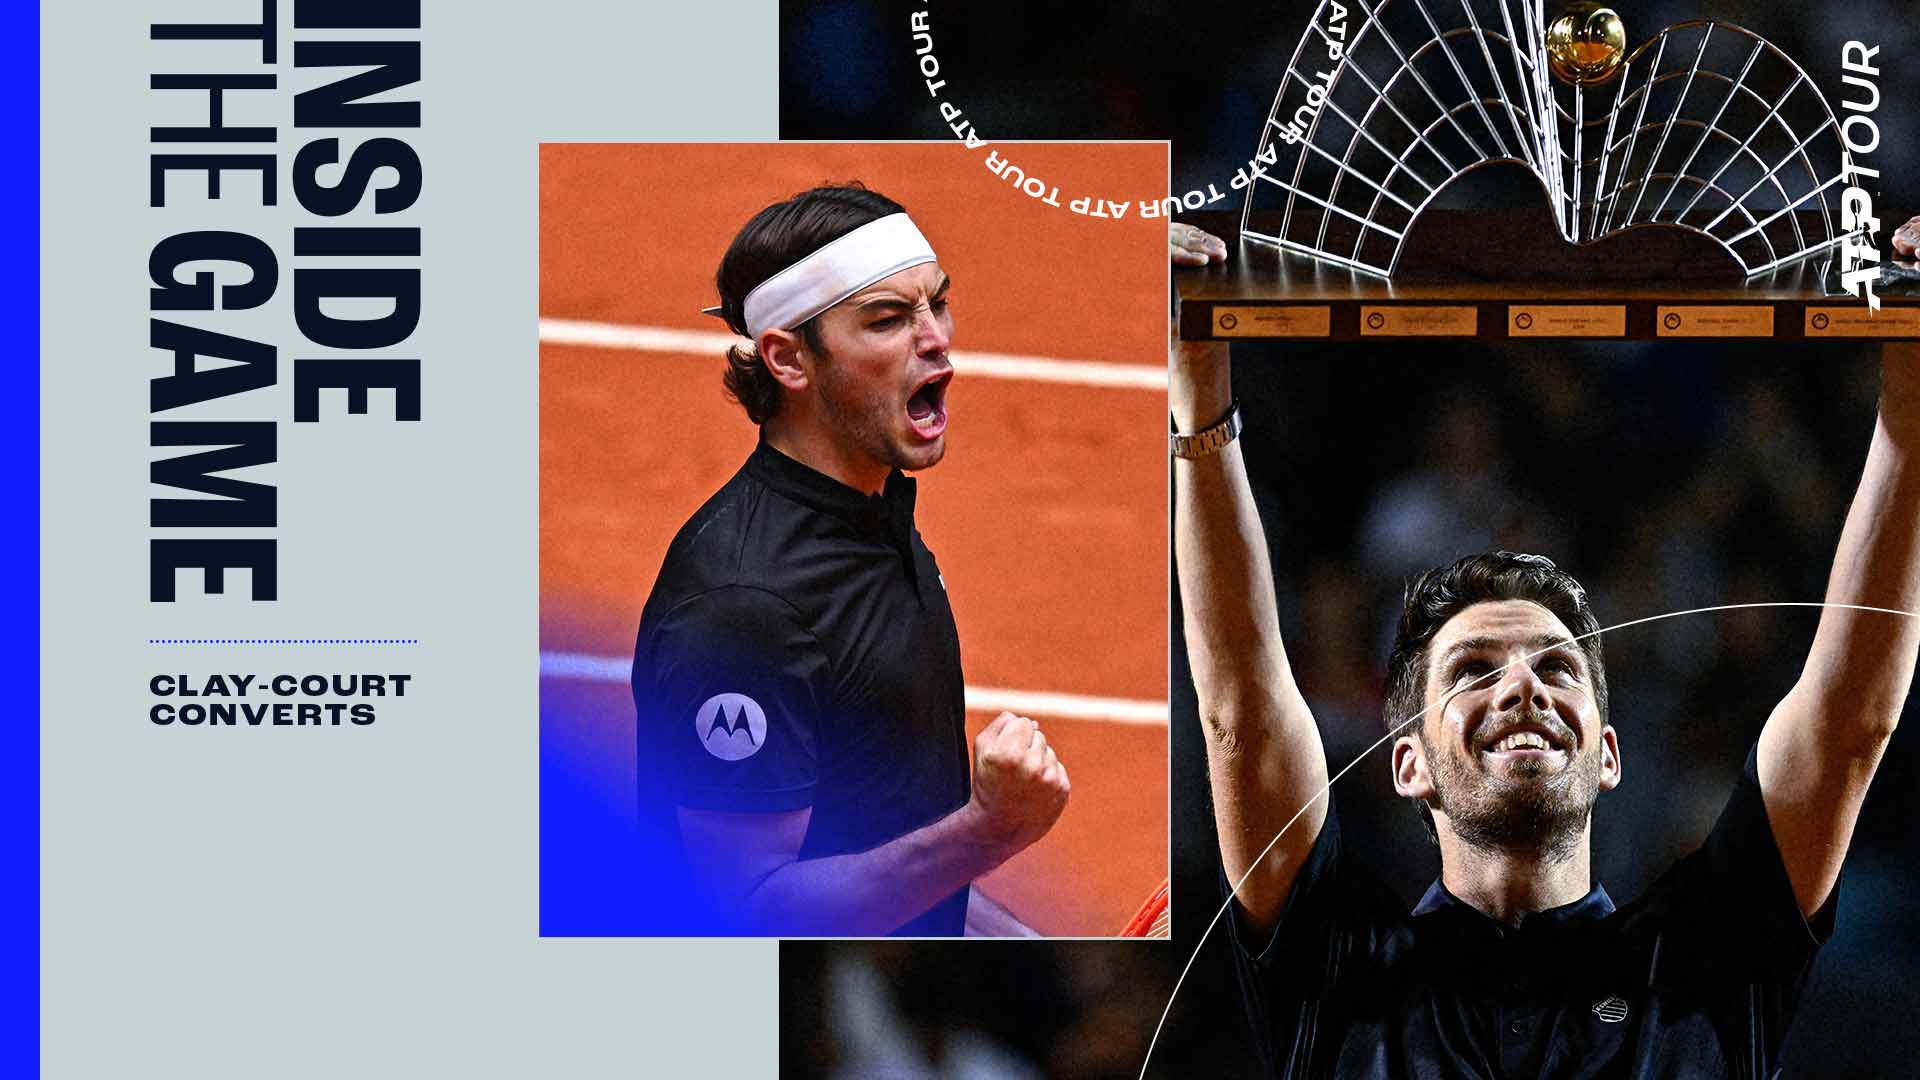 Clay-court Converts: Seeking success on the 'red dirt'